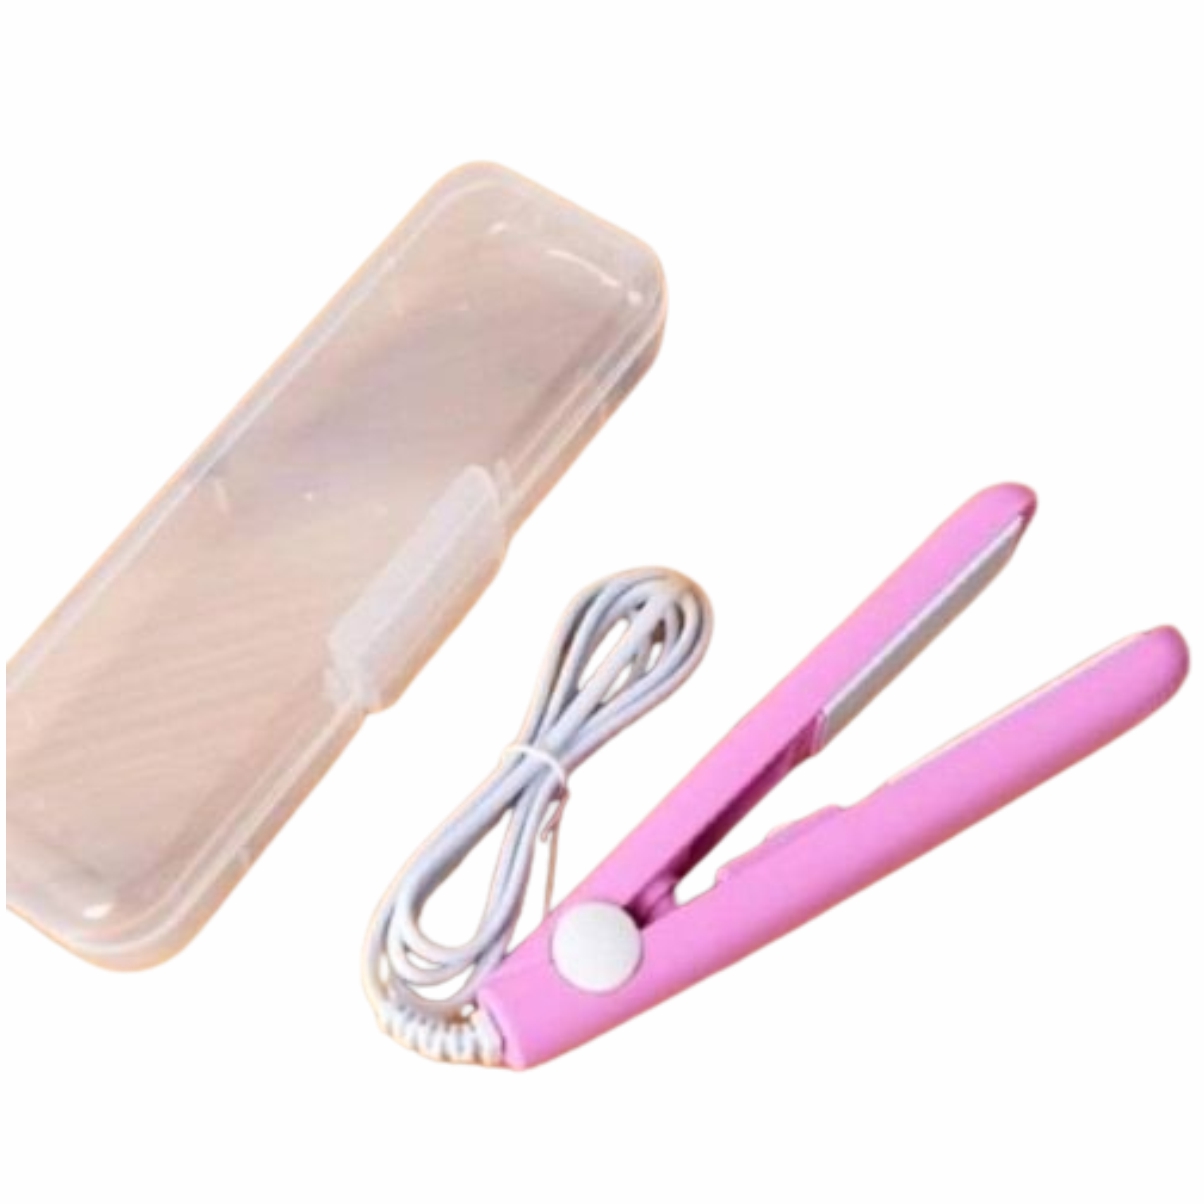 MINI Hair Straightener: Small, Lightweight Portable Flat Iron for Quick Styling